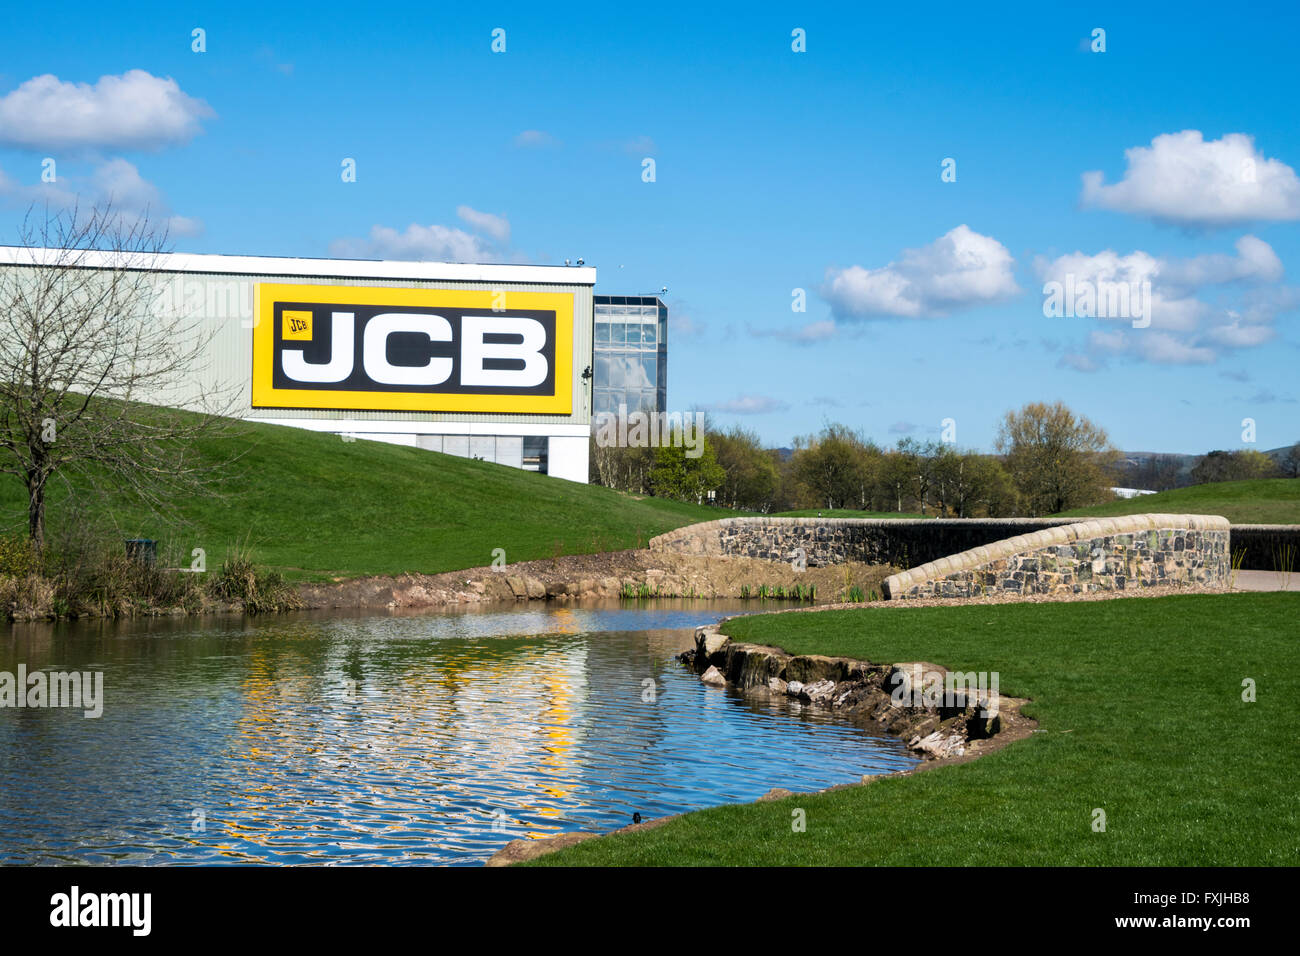 JCB World Headquarters at Rocester, Uttoxeter, Staffordshire with new JCB logo Stock Photo